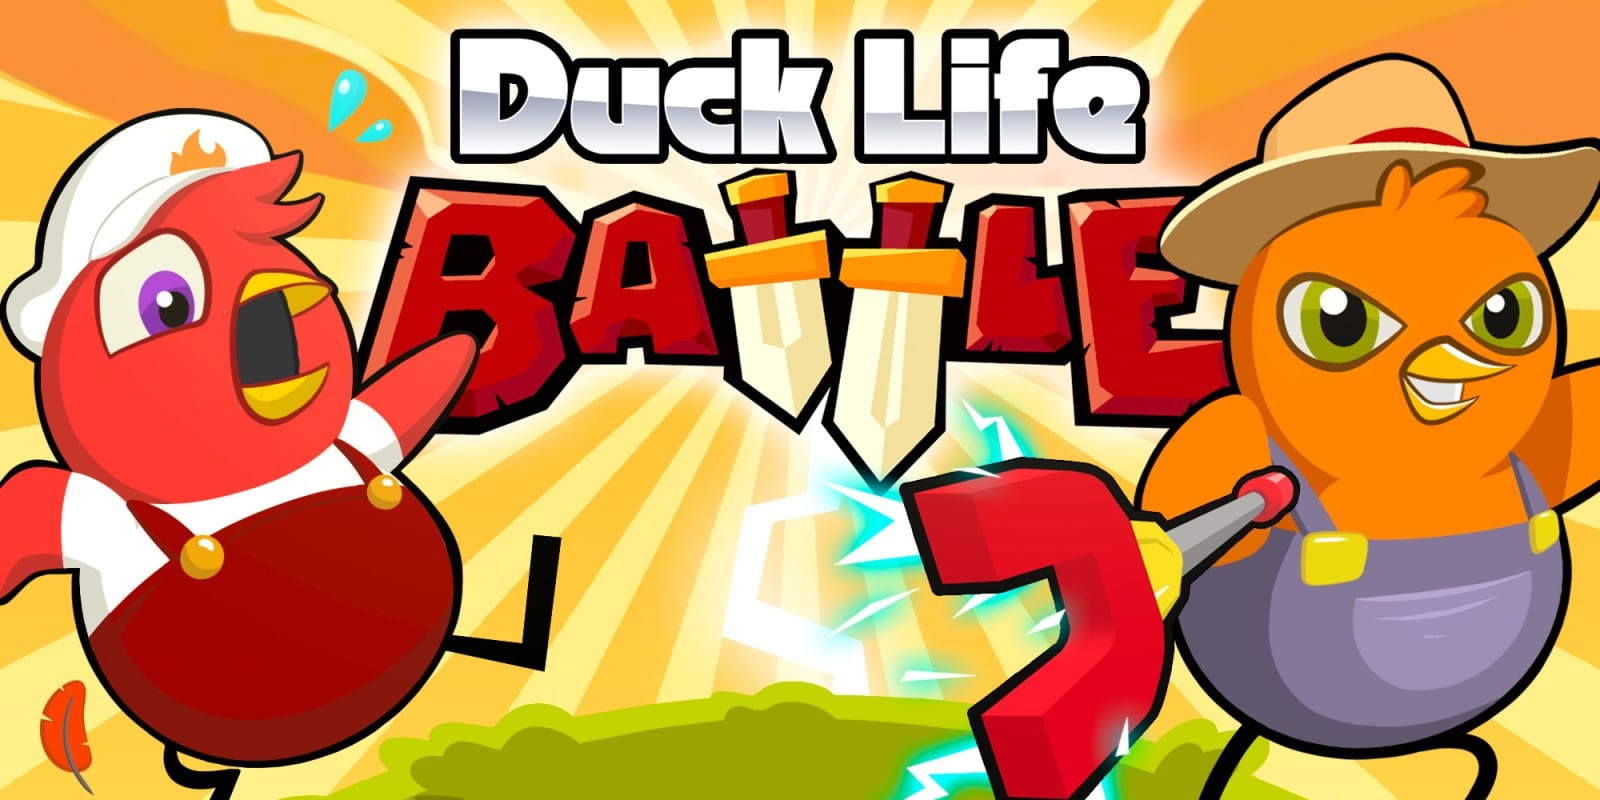 Duck Life - Flash games might be dying, but the Duck Life games never will!  Now you can play the original 3 Duck Life Flash games, remastered in full  HD on your